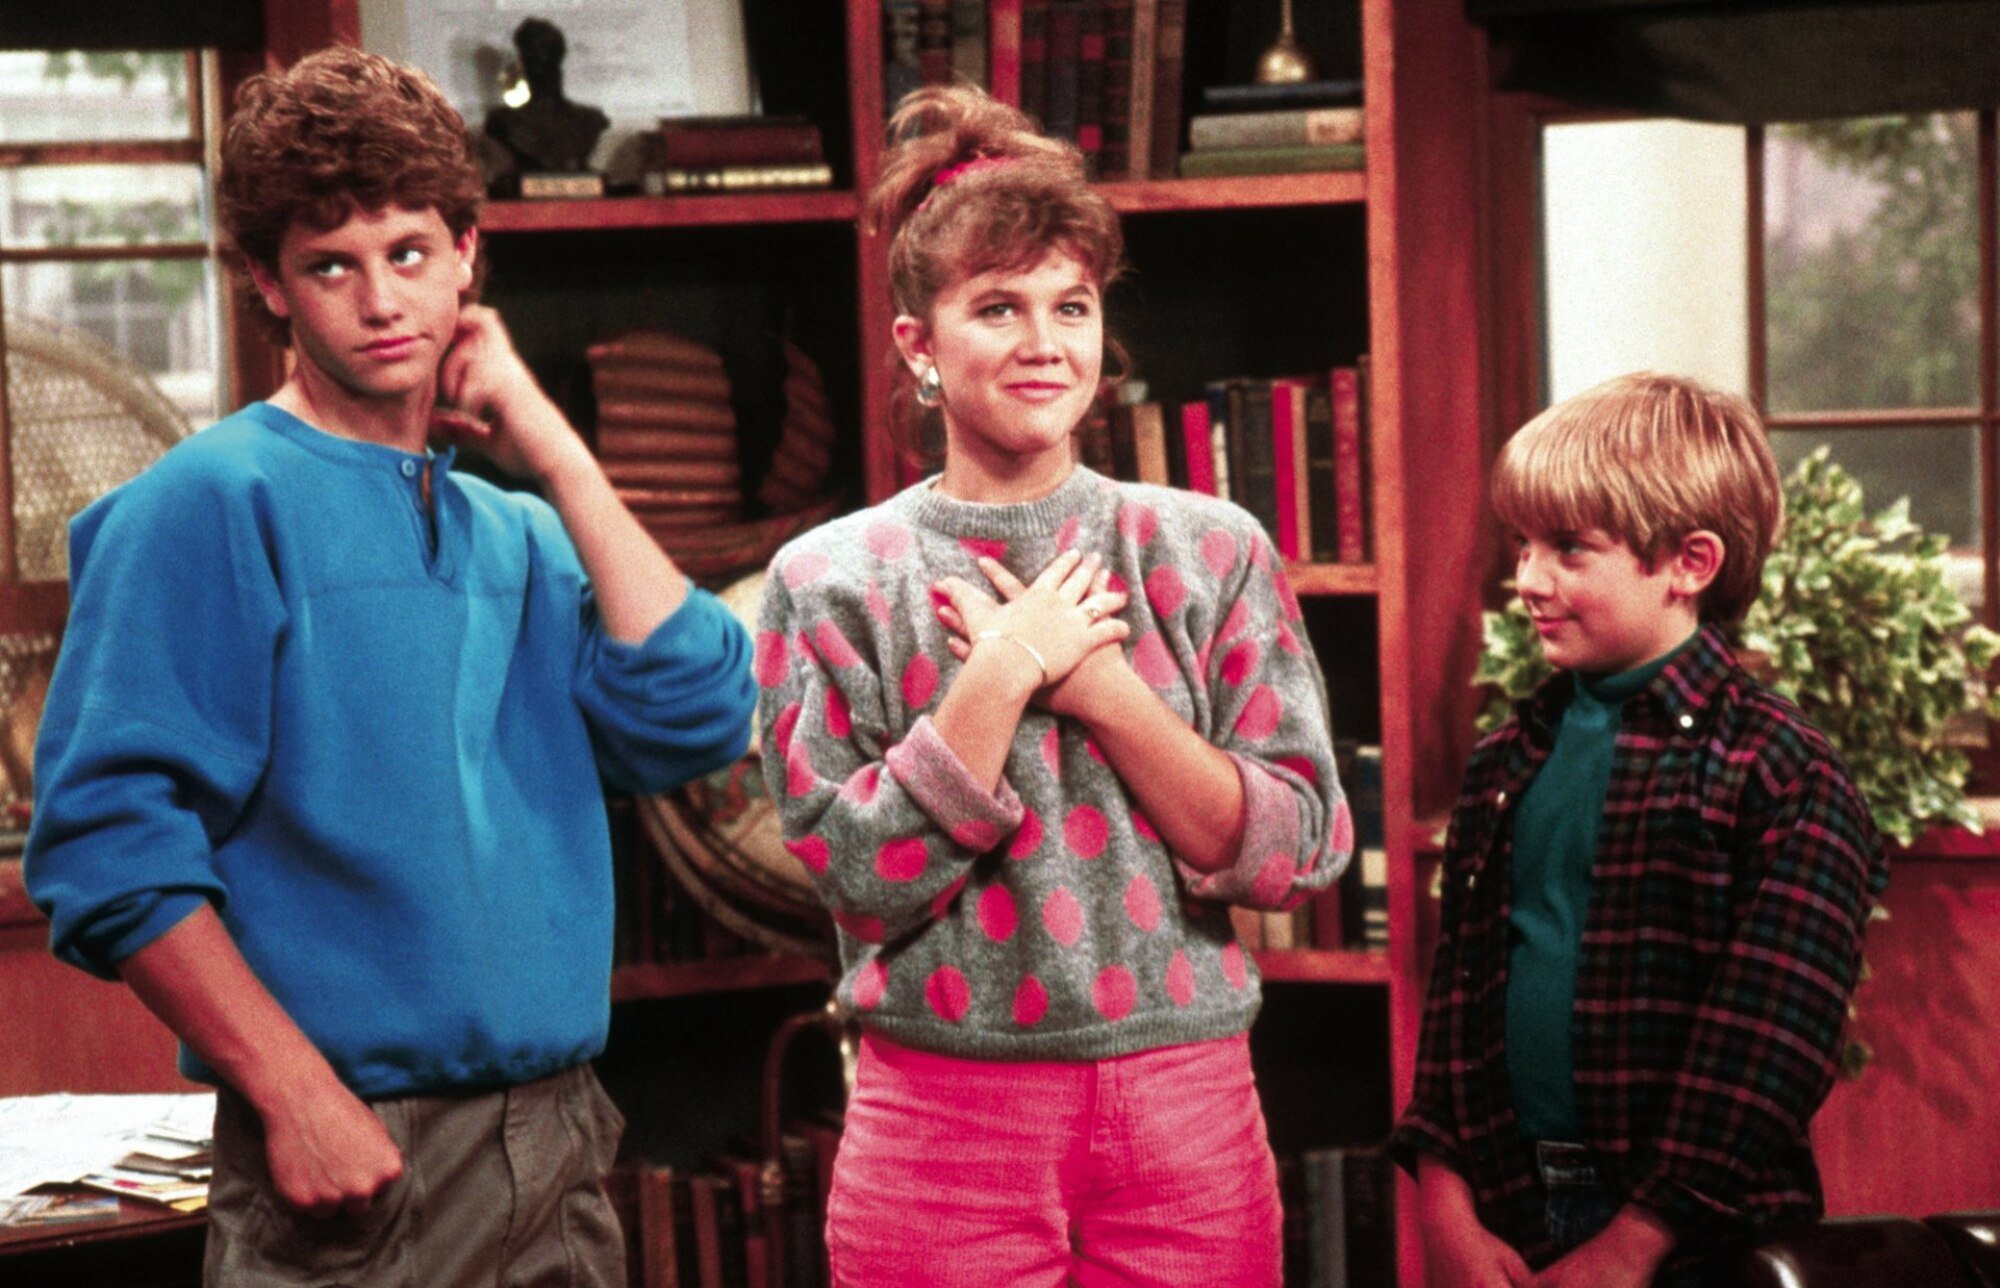 Kirk Cameron, Tracey Gold, and Jeremy Miller as the Seaver siblings in "Growing Pains."